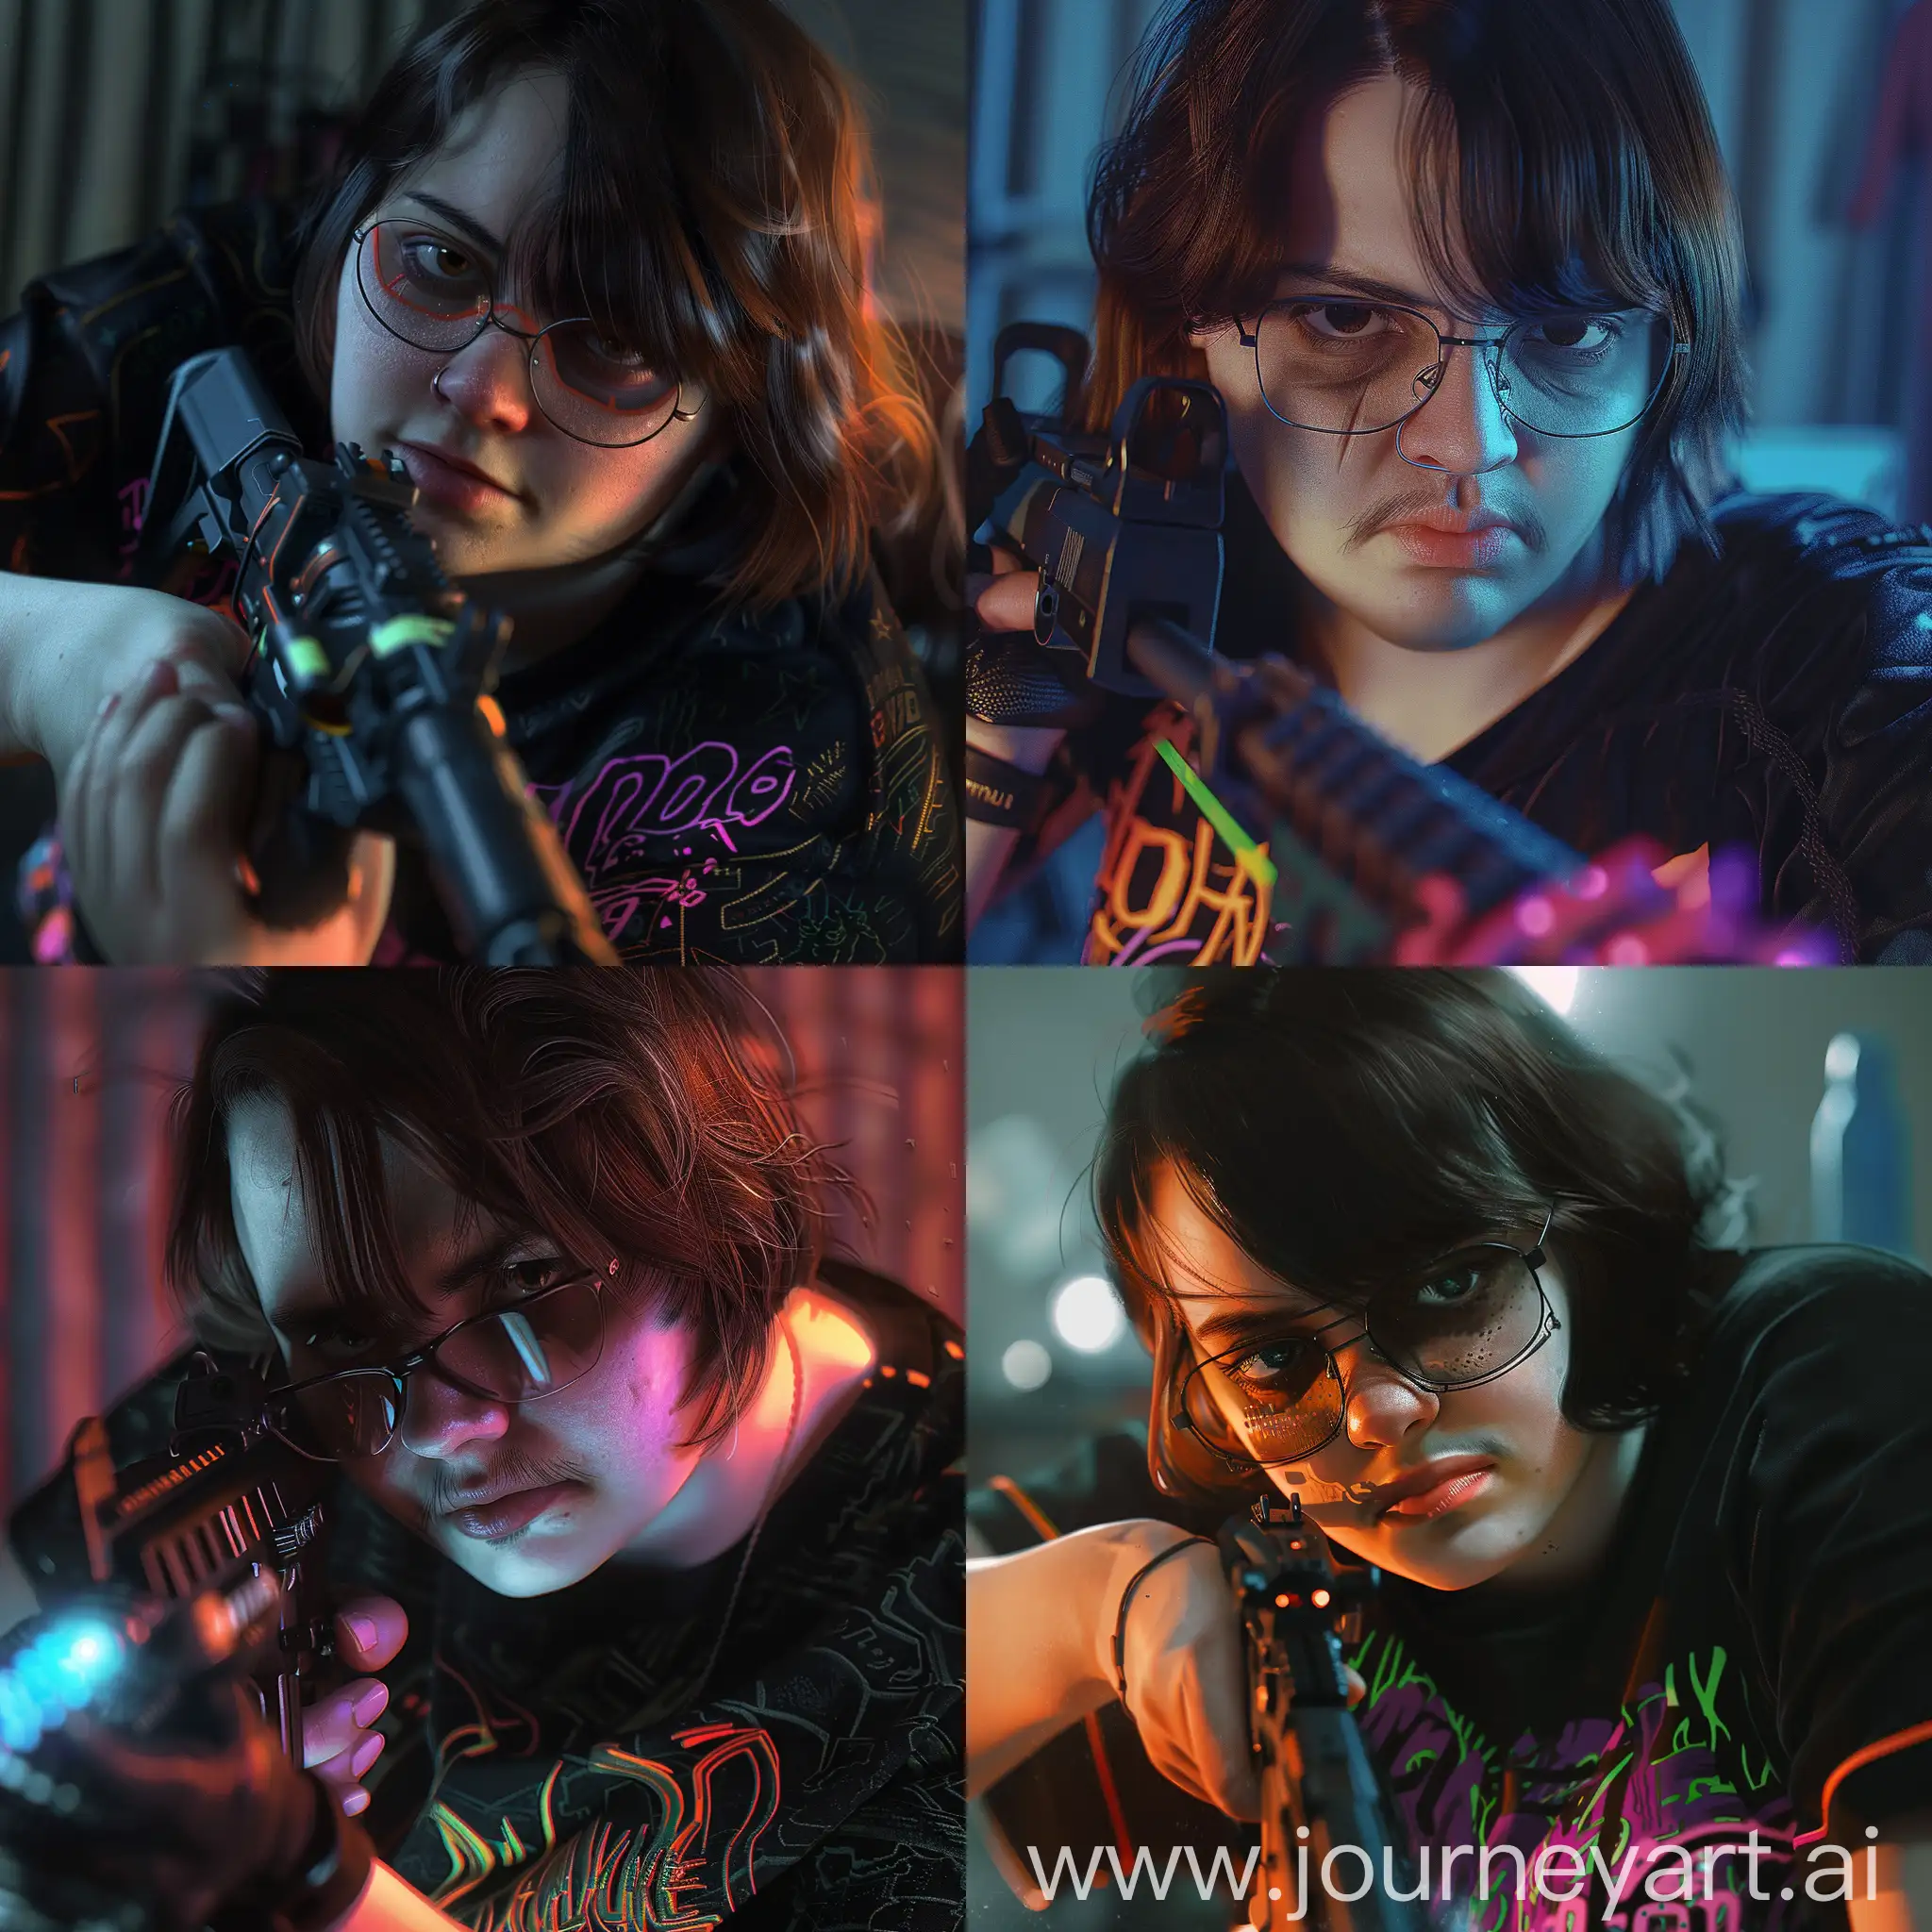  in action, shooting, Focus on face, high resolution, high details, high quality, full body shot, digital art, detailed character illustrations, medium closeup, super realistic, hyperdetailed, cinematic lighting, concept art